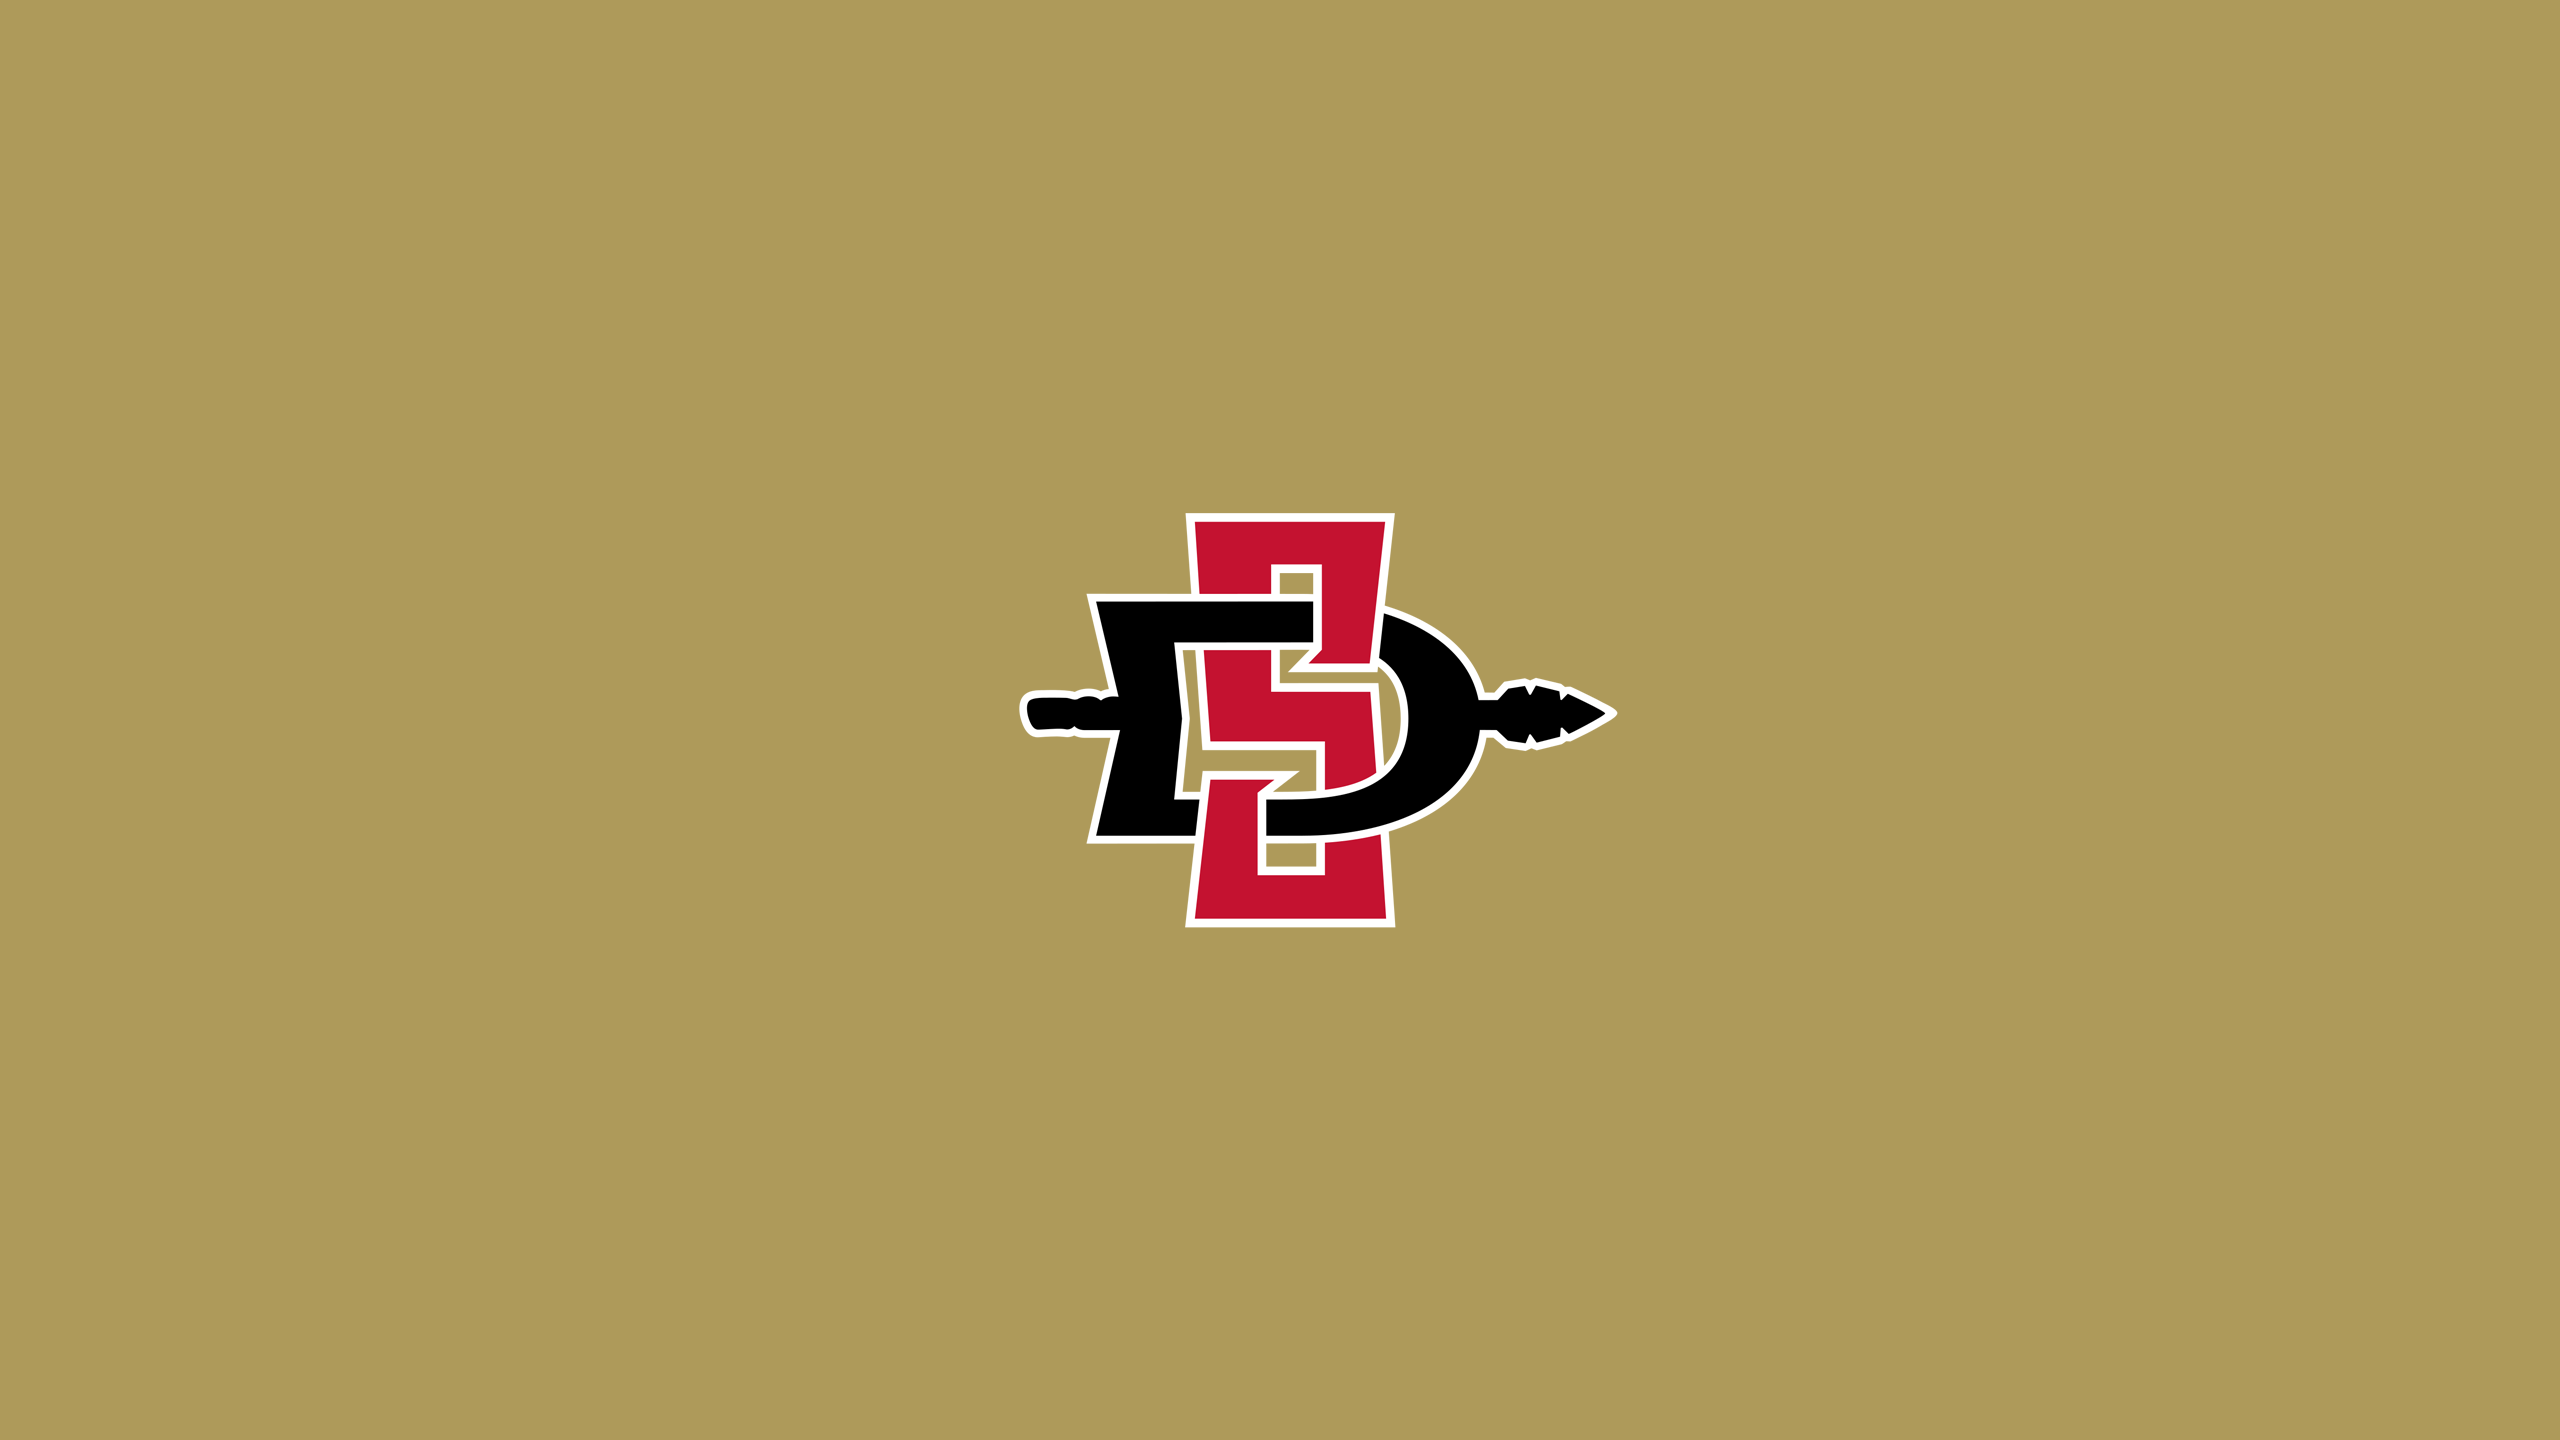 San Diego State Aztecs Basketball - NCAAB - Square Bettor